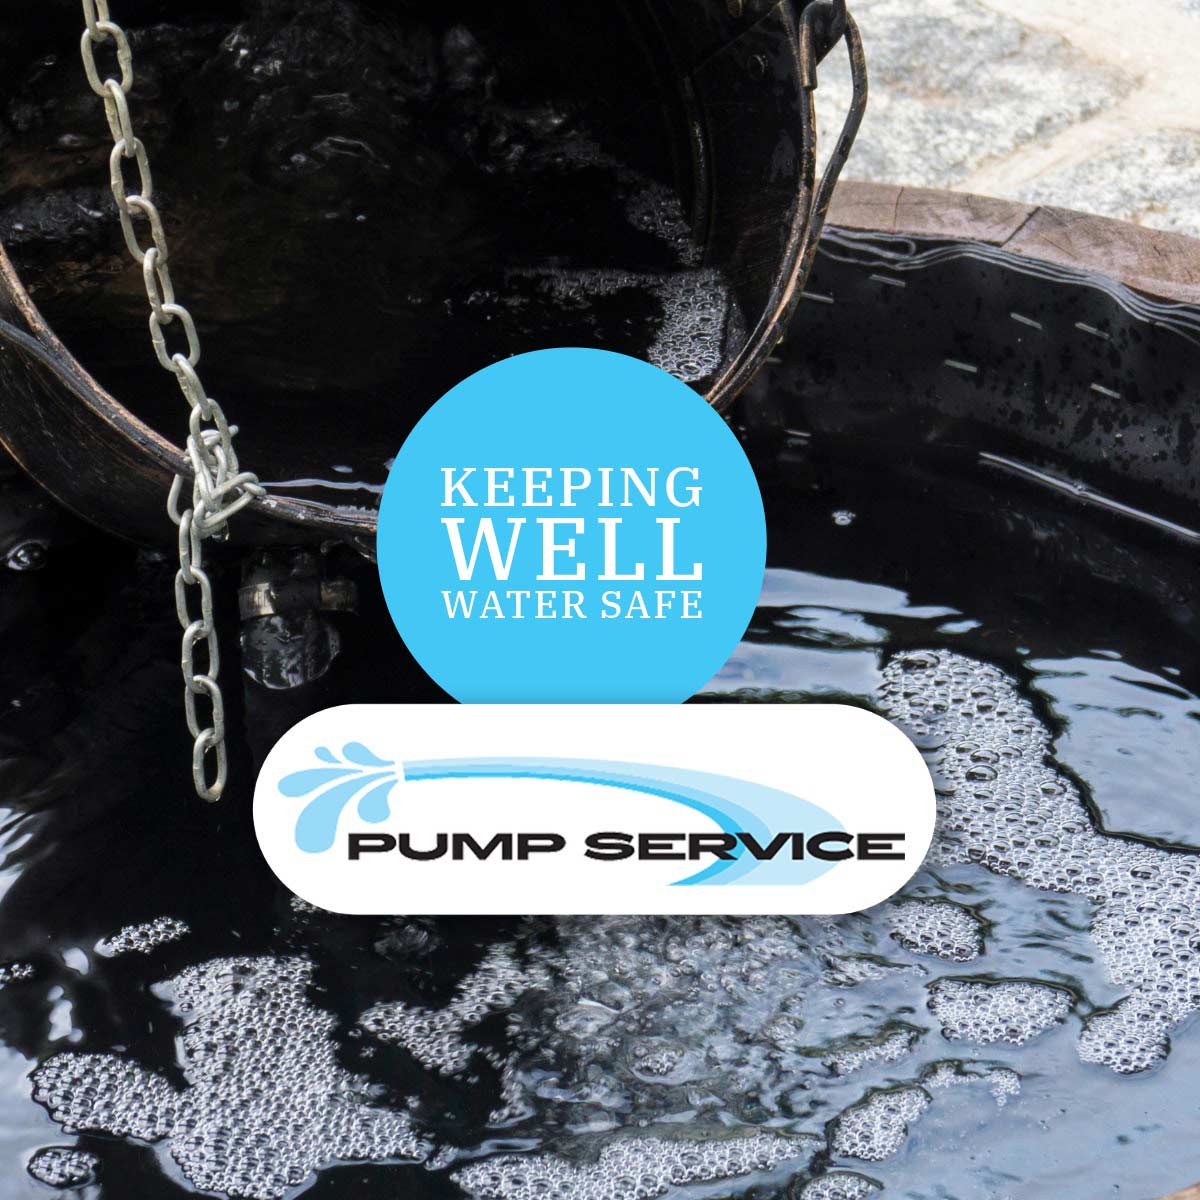 Keeping Well Water Safe for Rural Southern Idaho Residents with PumpServiceIdaho.com